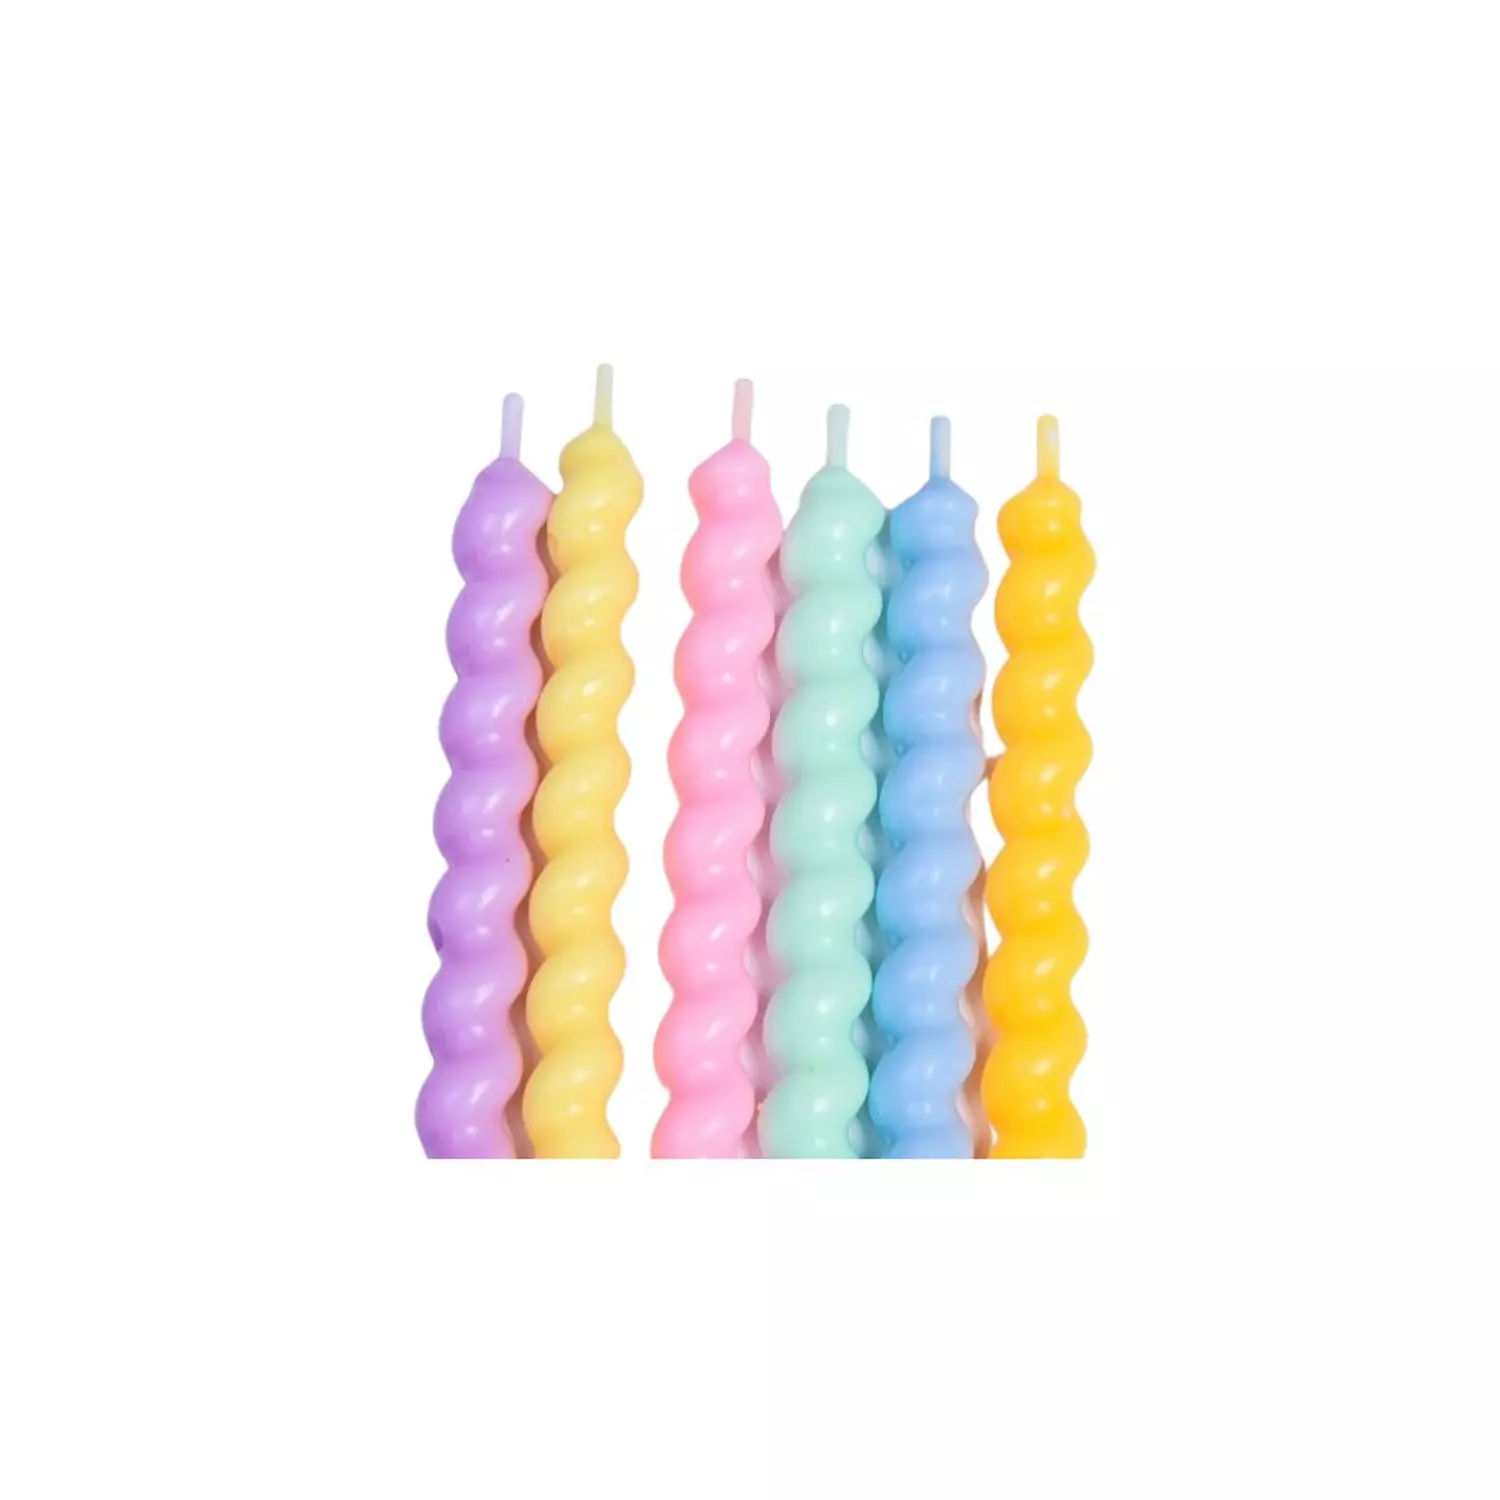 Pastel Waived Candle Set hover image